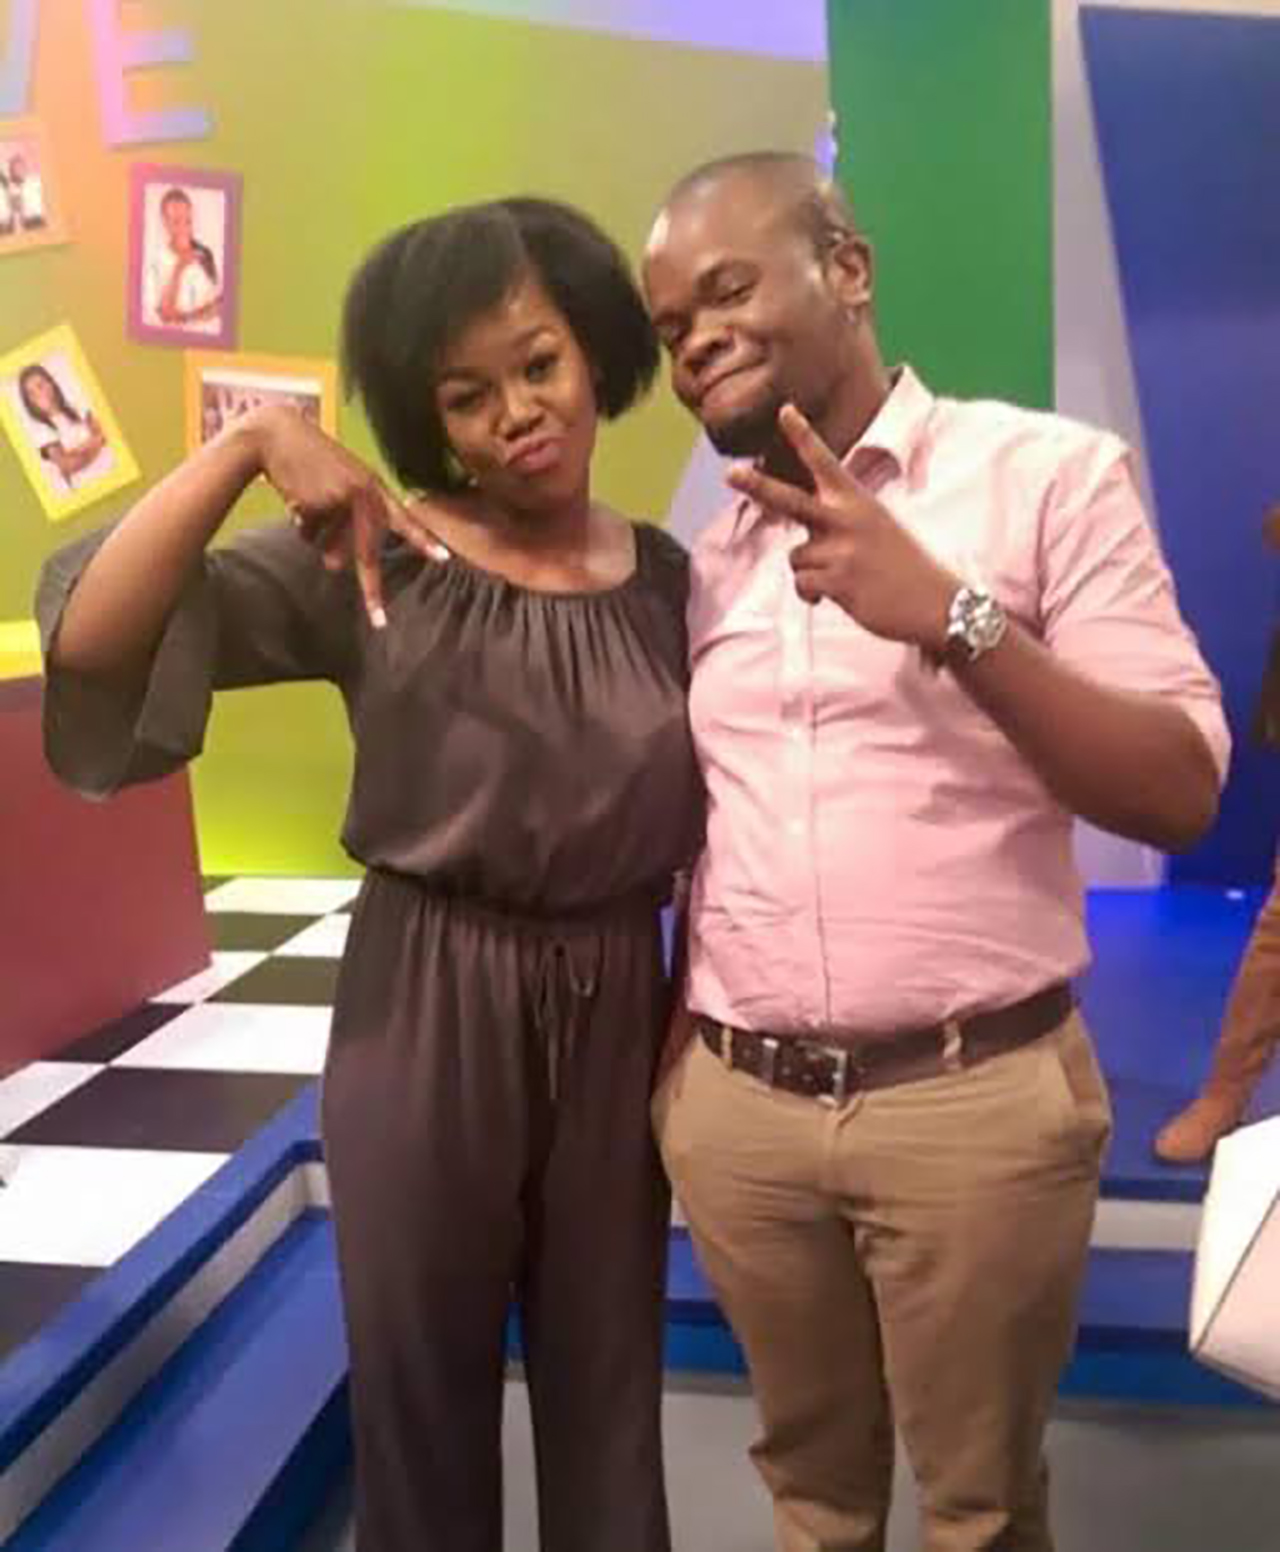 Read Messages of condolences pour in for former YOTV presenter as she loses brother 2